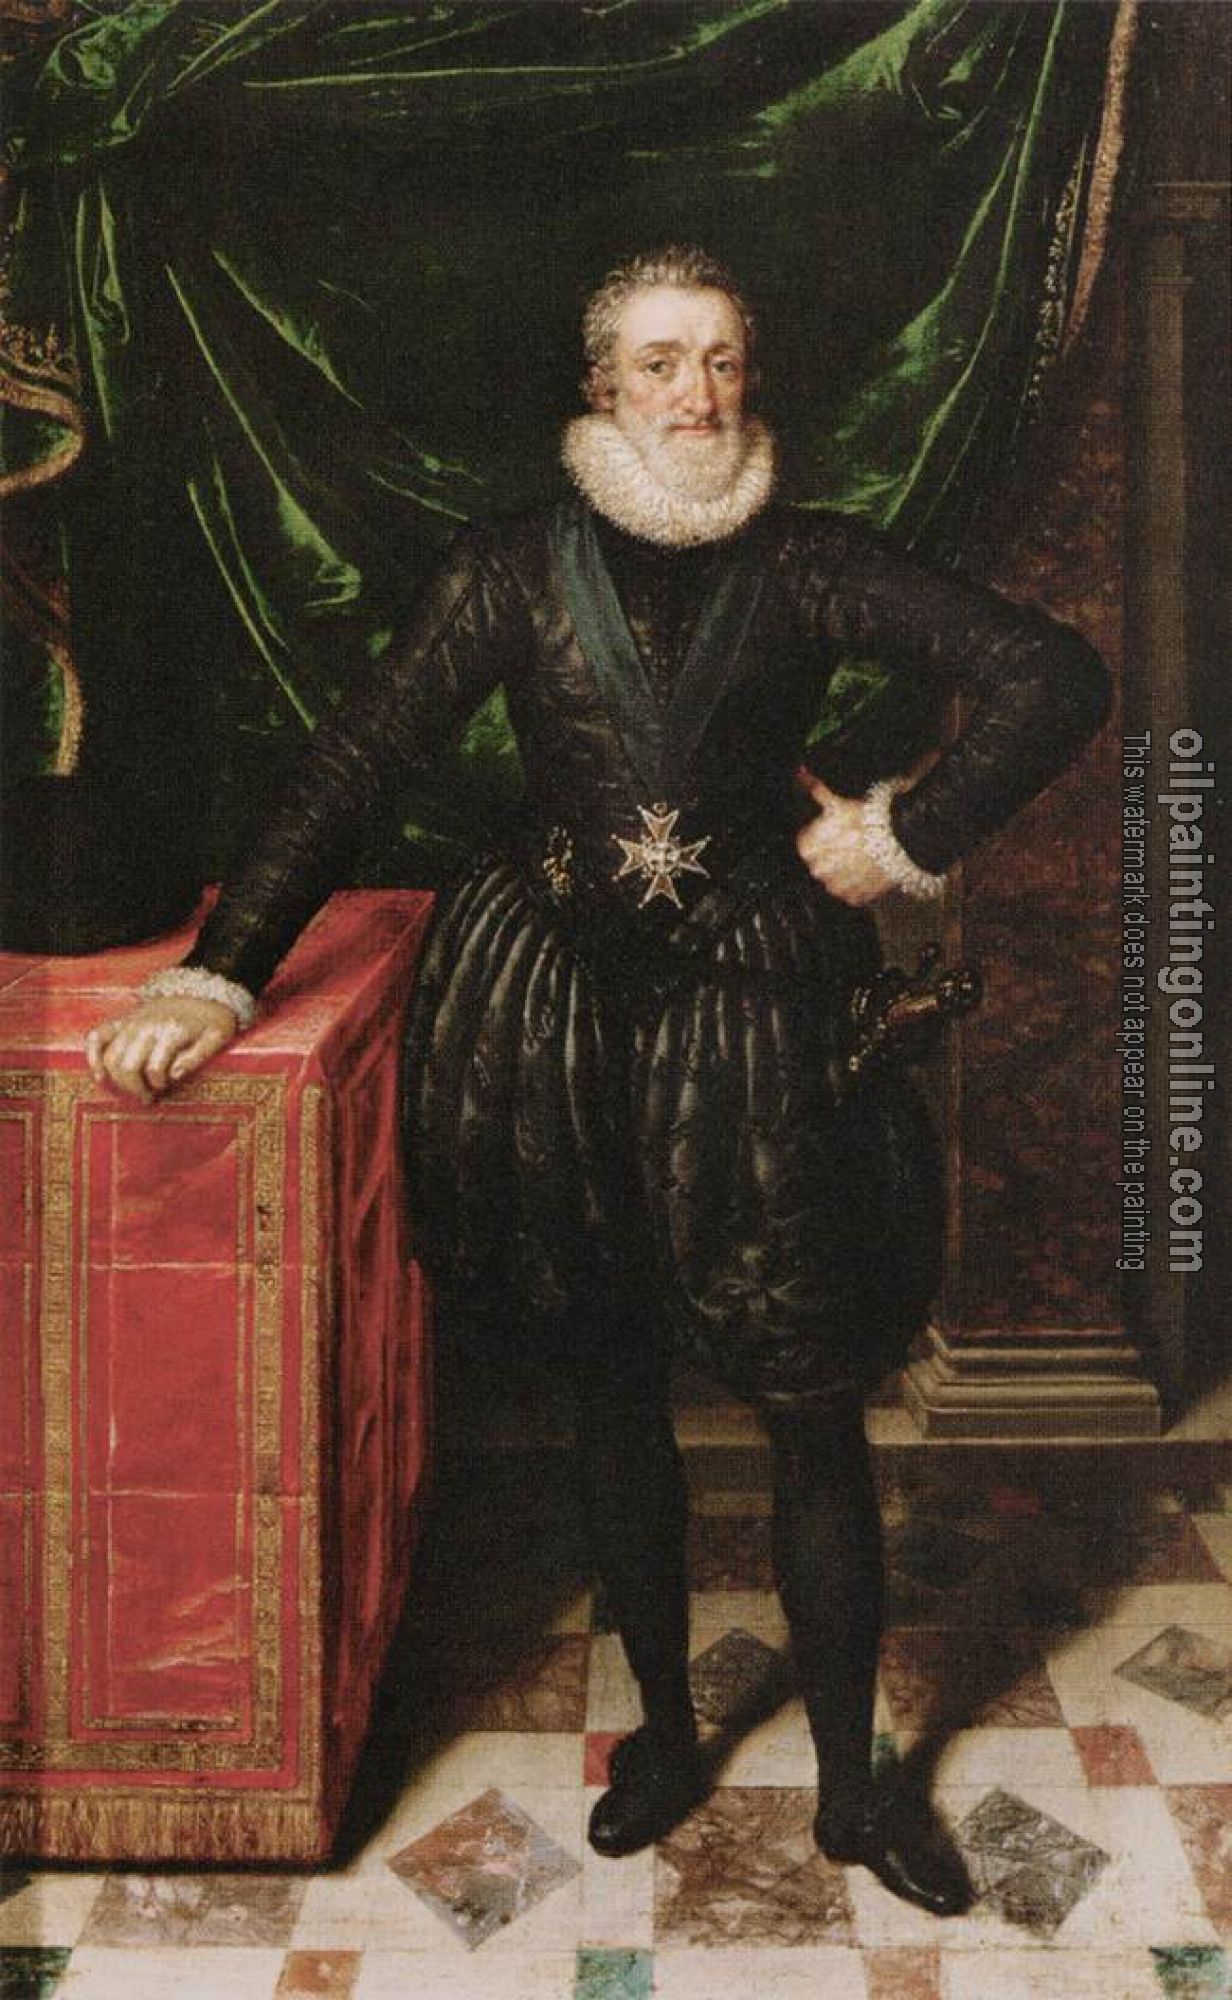 Pourbus, Frans the Younger - Henry IV, King of France in Black Dress